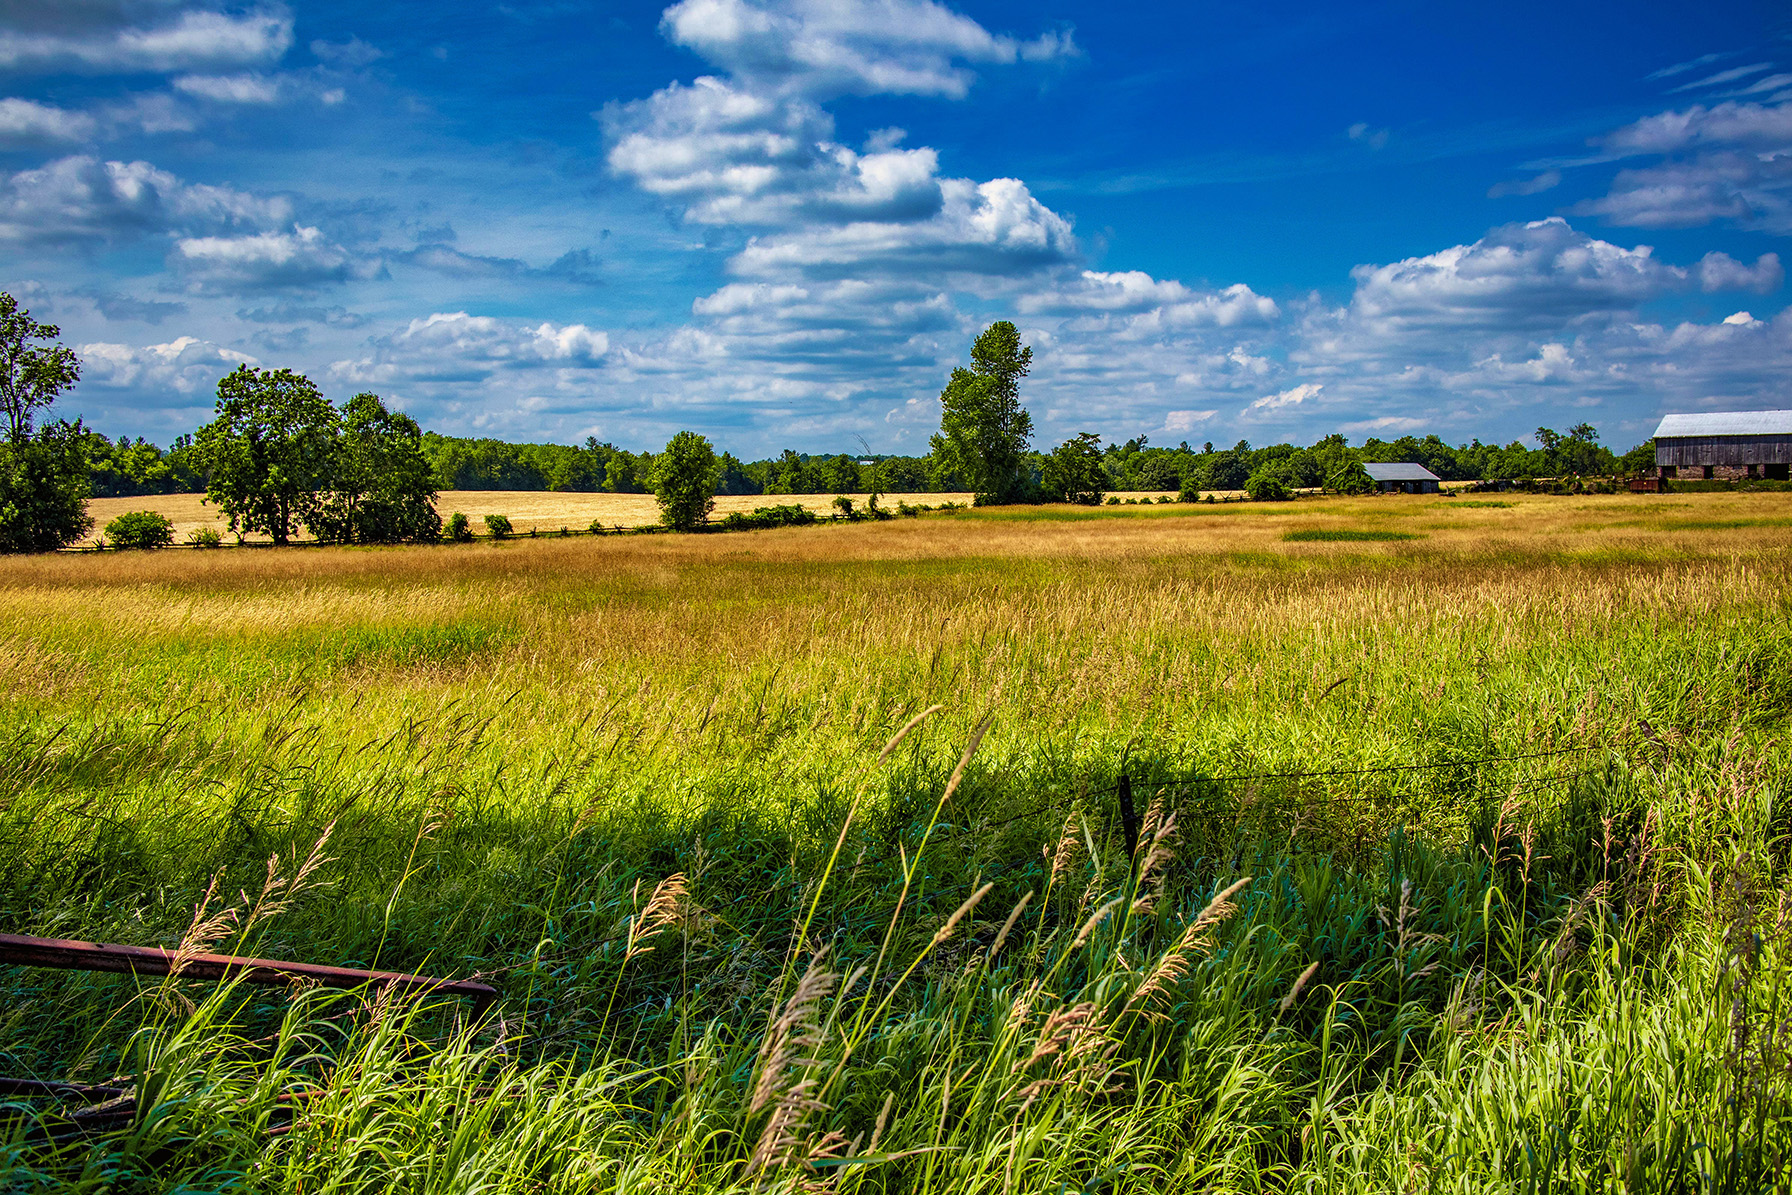 A photo of a field of green grass with a cloudy blue sky in the background.